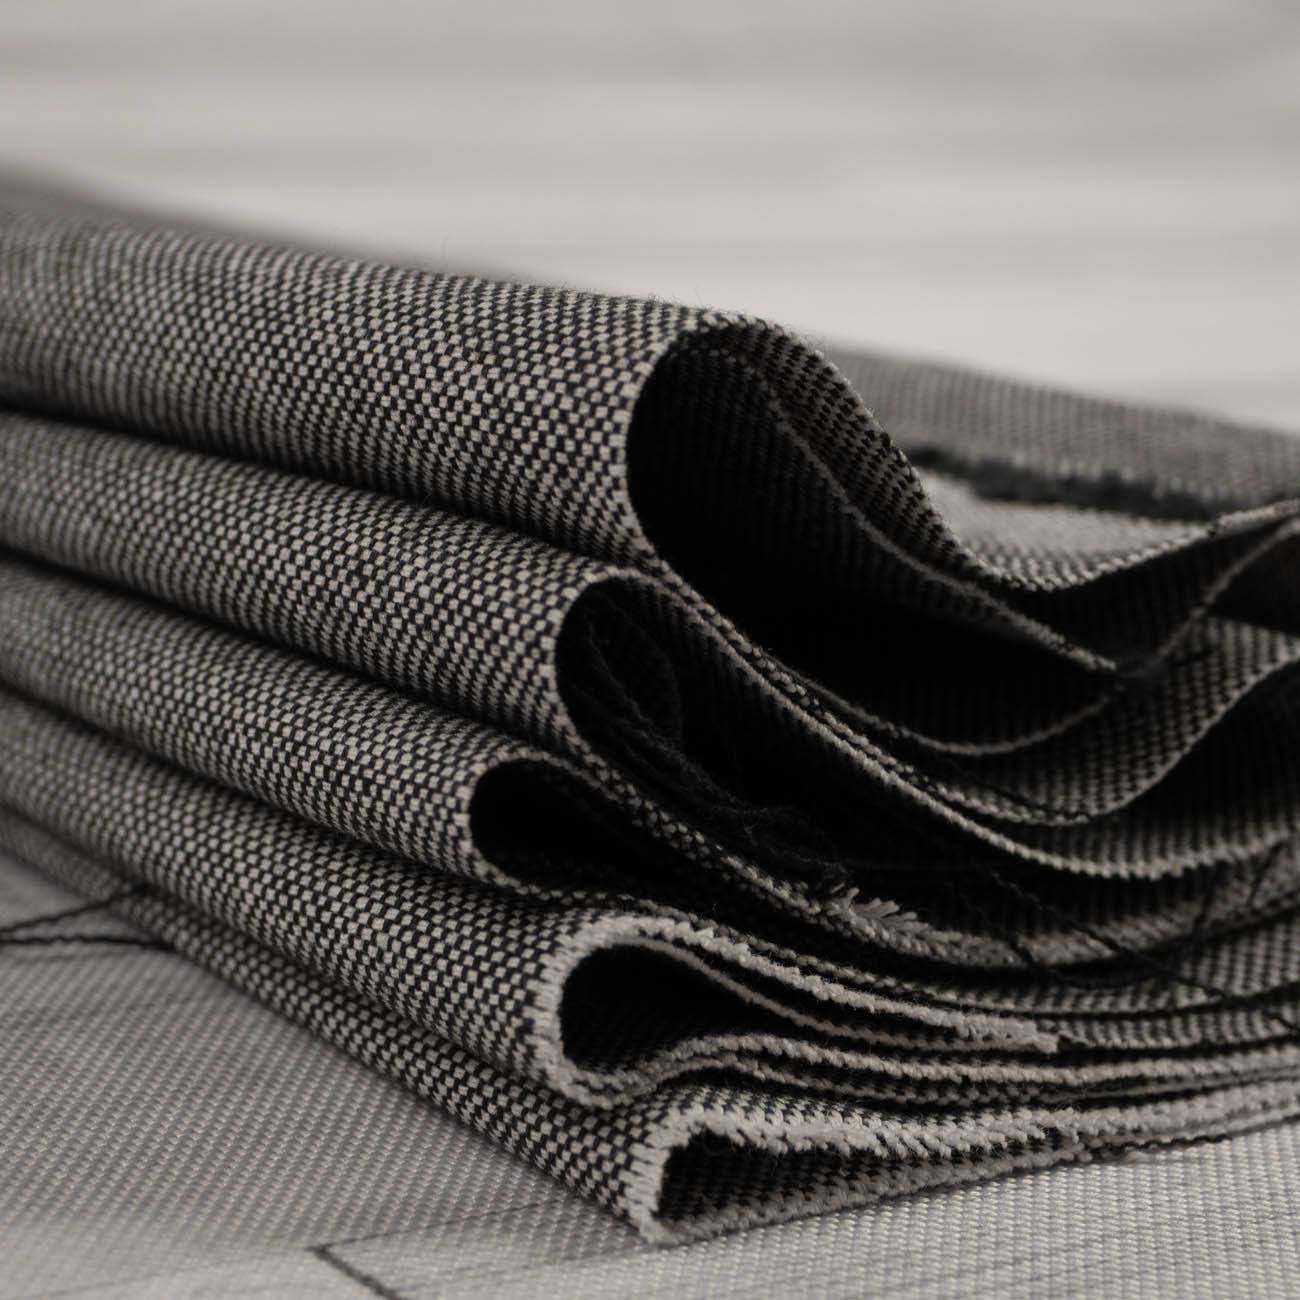 GREY - Jeans woven fabric 200g